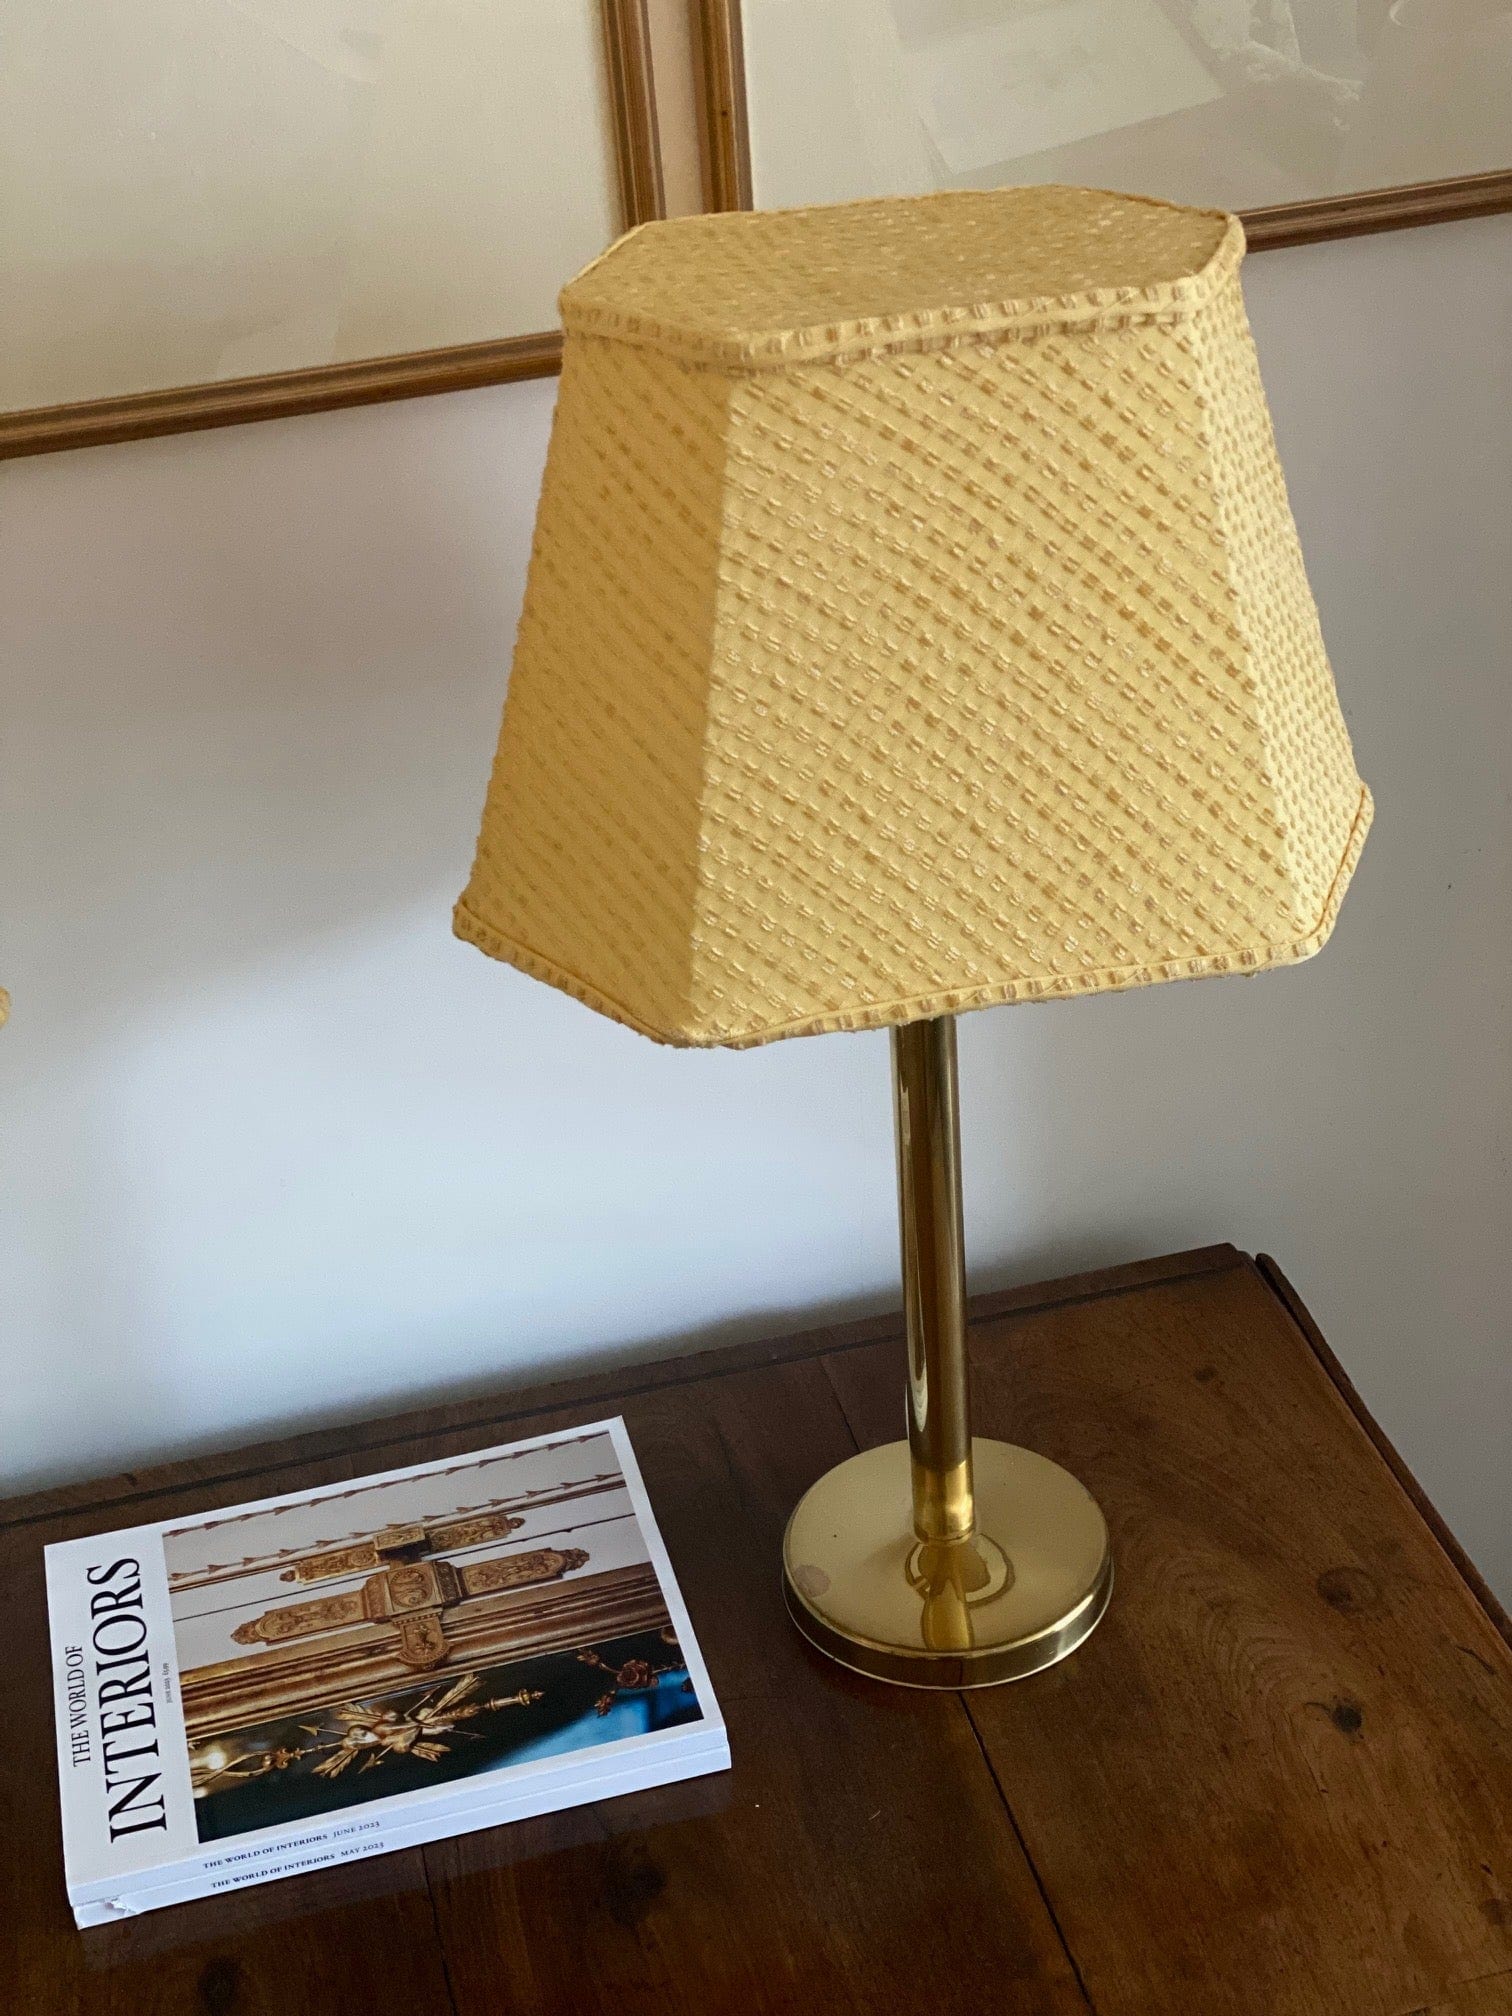 KEPT London Pair of brass lamps with shades